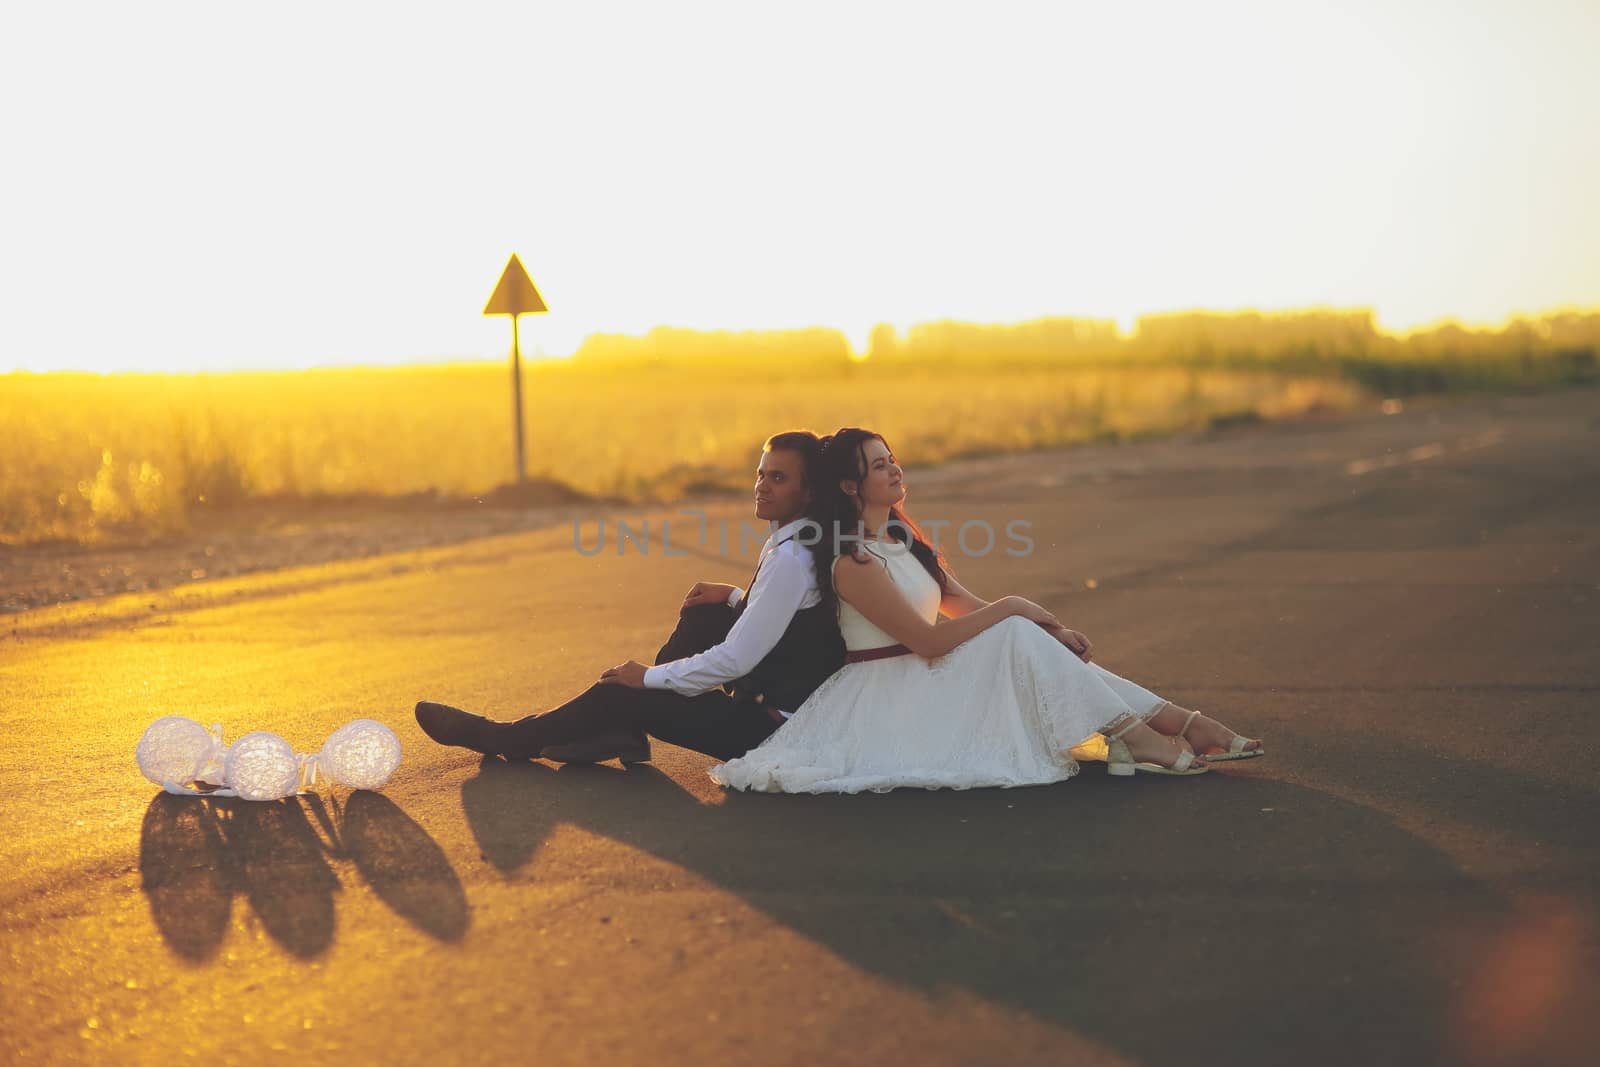 The bride and groom sit with their backs to each other in the sunset light. wedding. Happy love concept. High quality photo